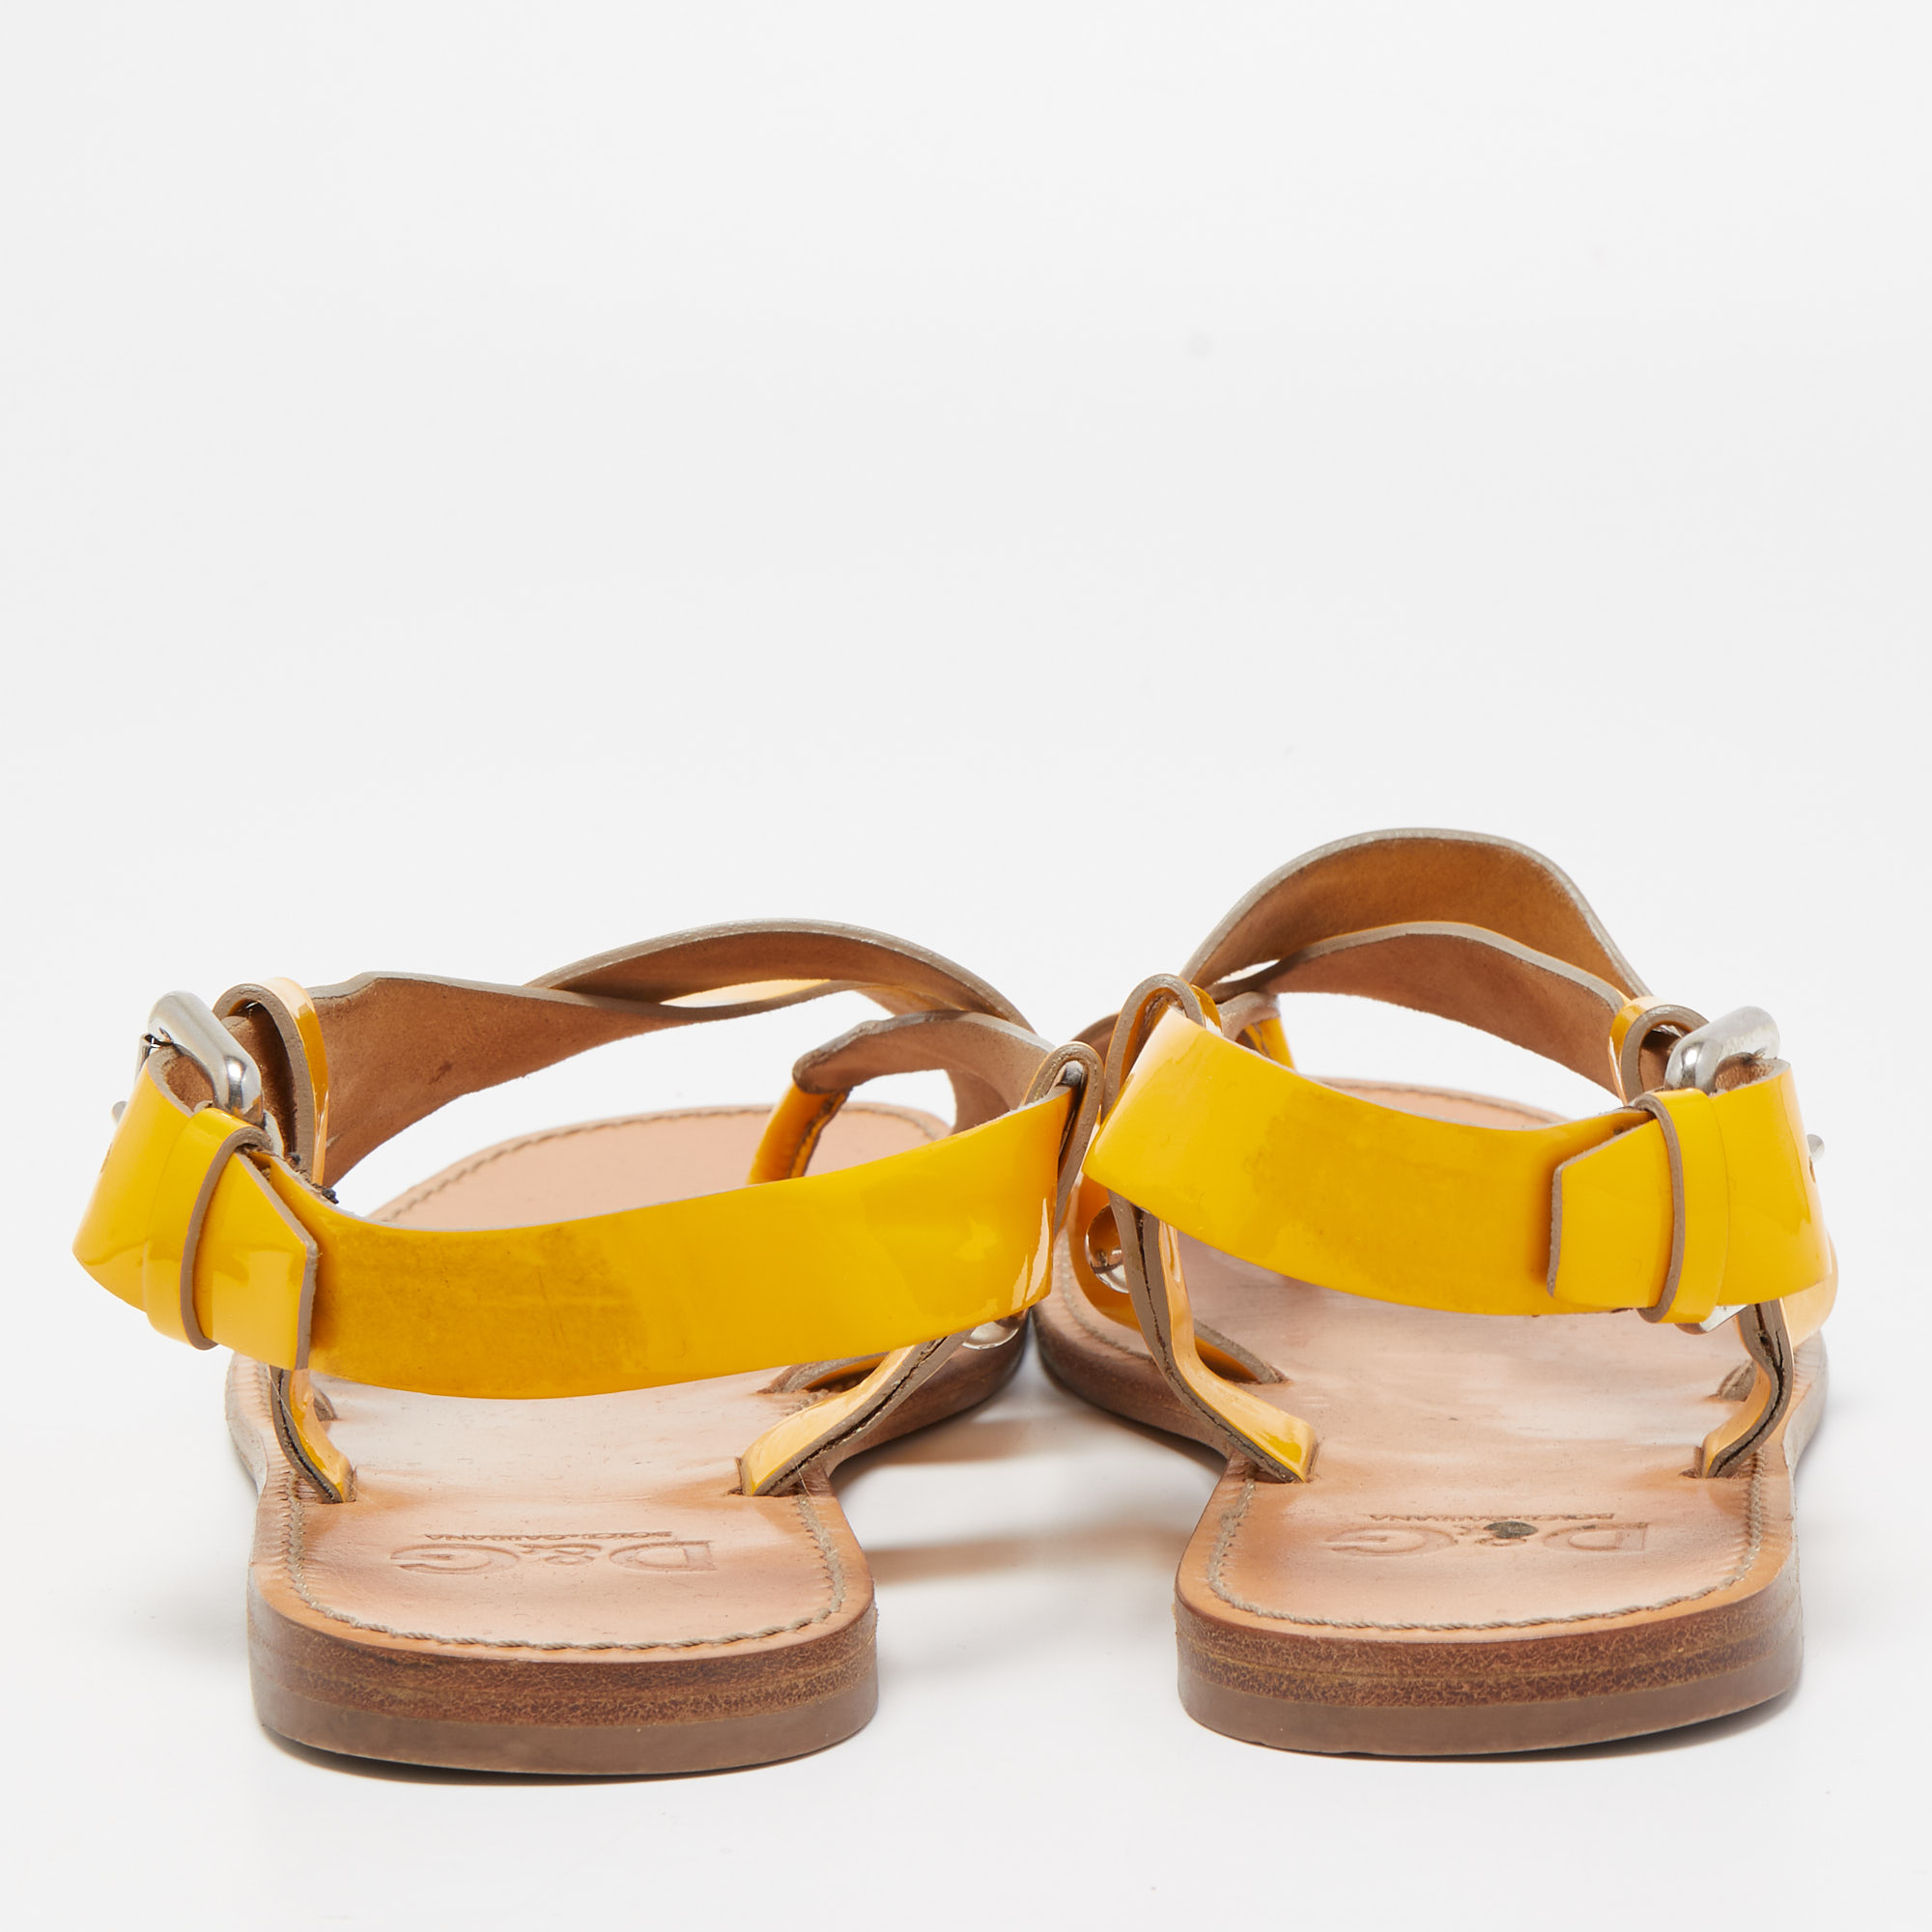 Dolce & Gabbana Yellow Patent Leather Toe Ring Flat Sandals Size 39